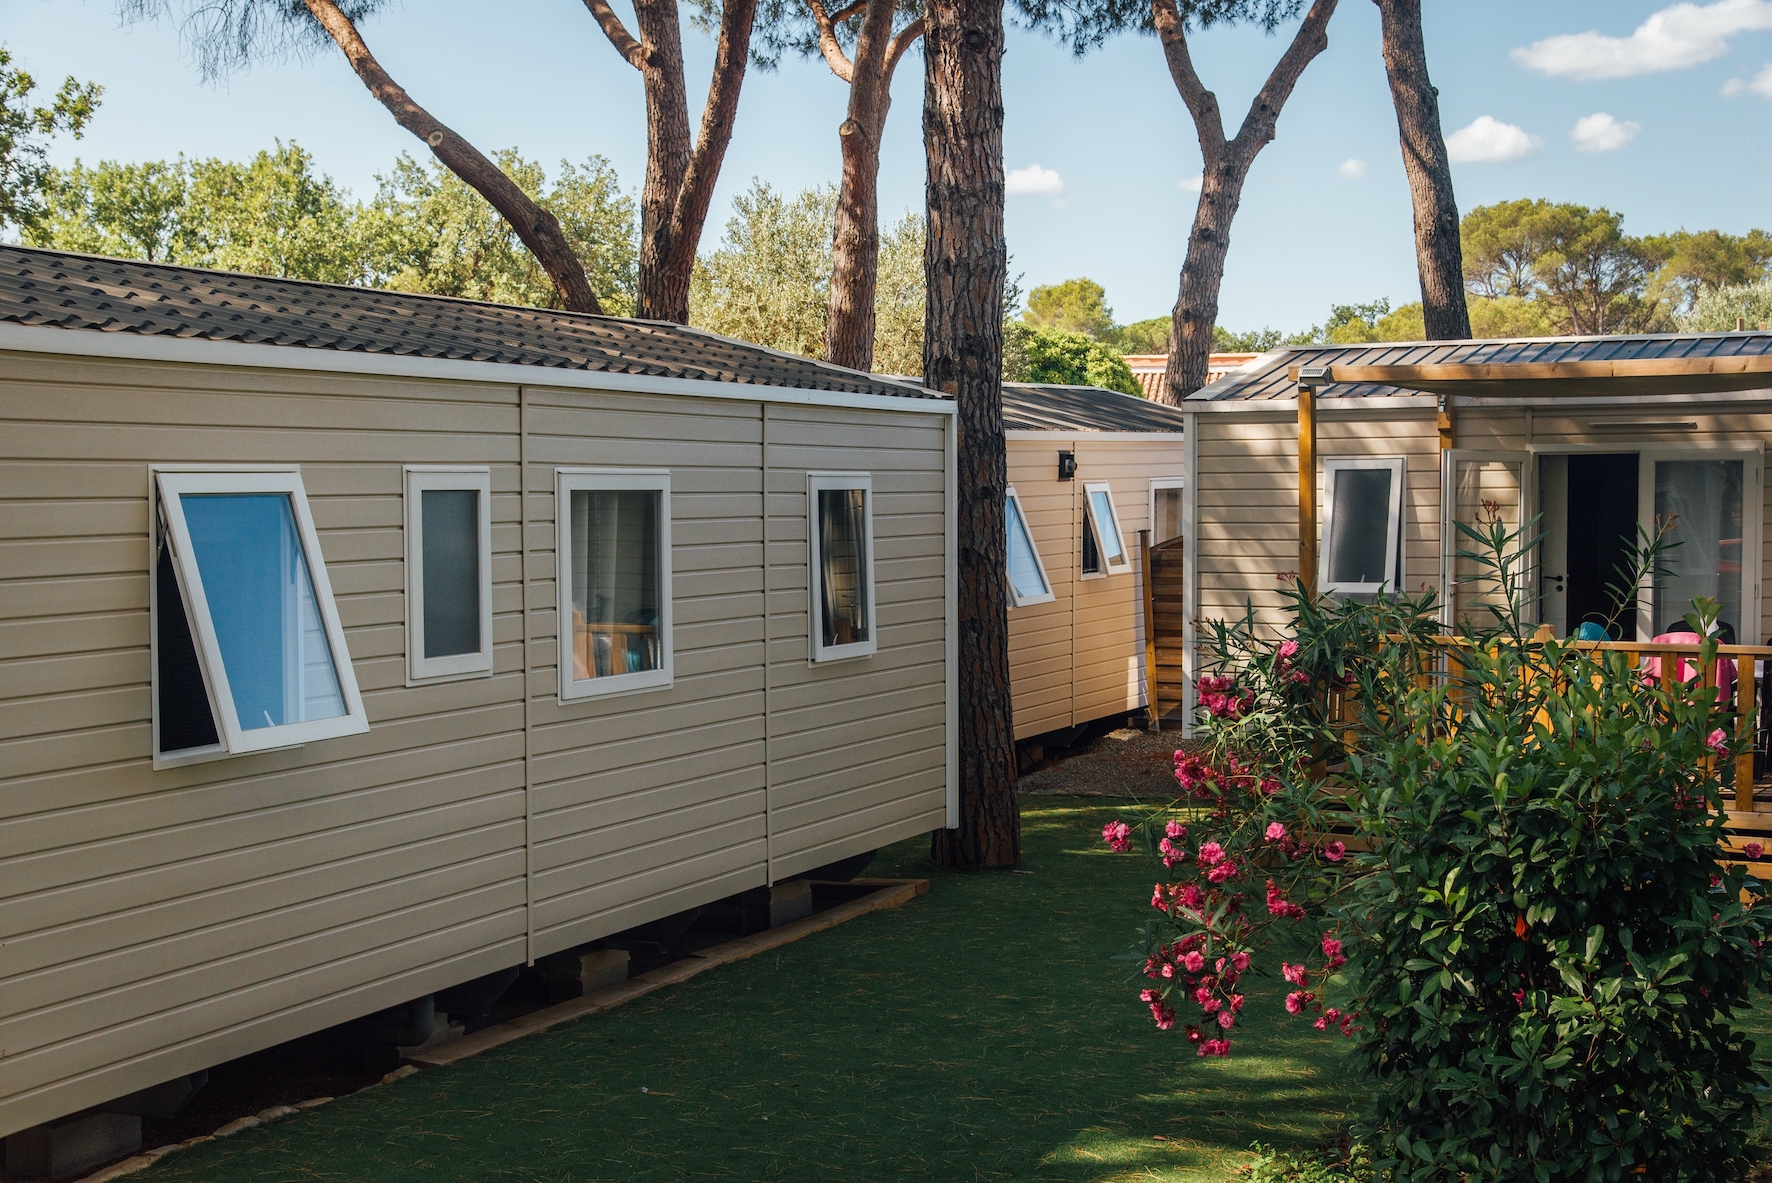 Holiday Home or Permanent Residence – Finding the Right Insurance for Your Mobile Home